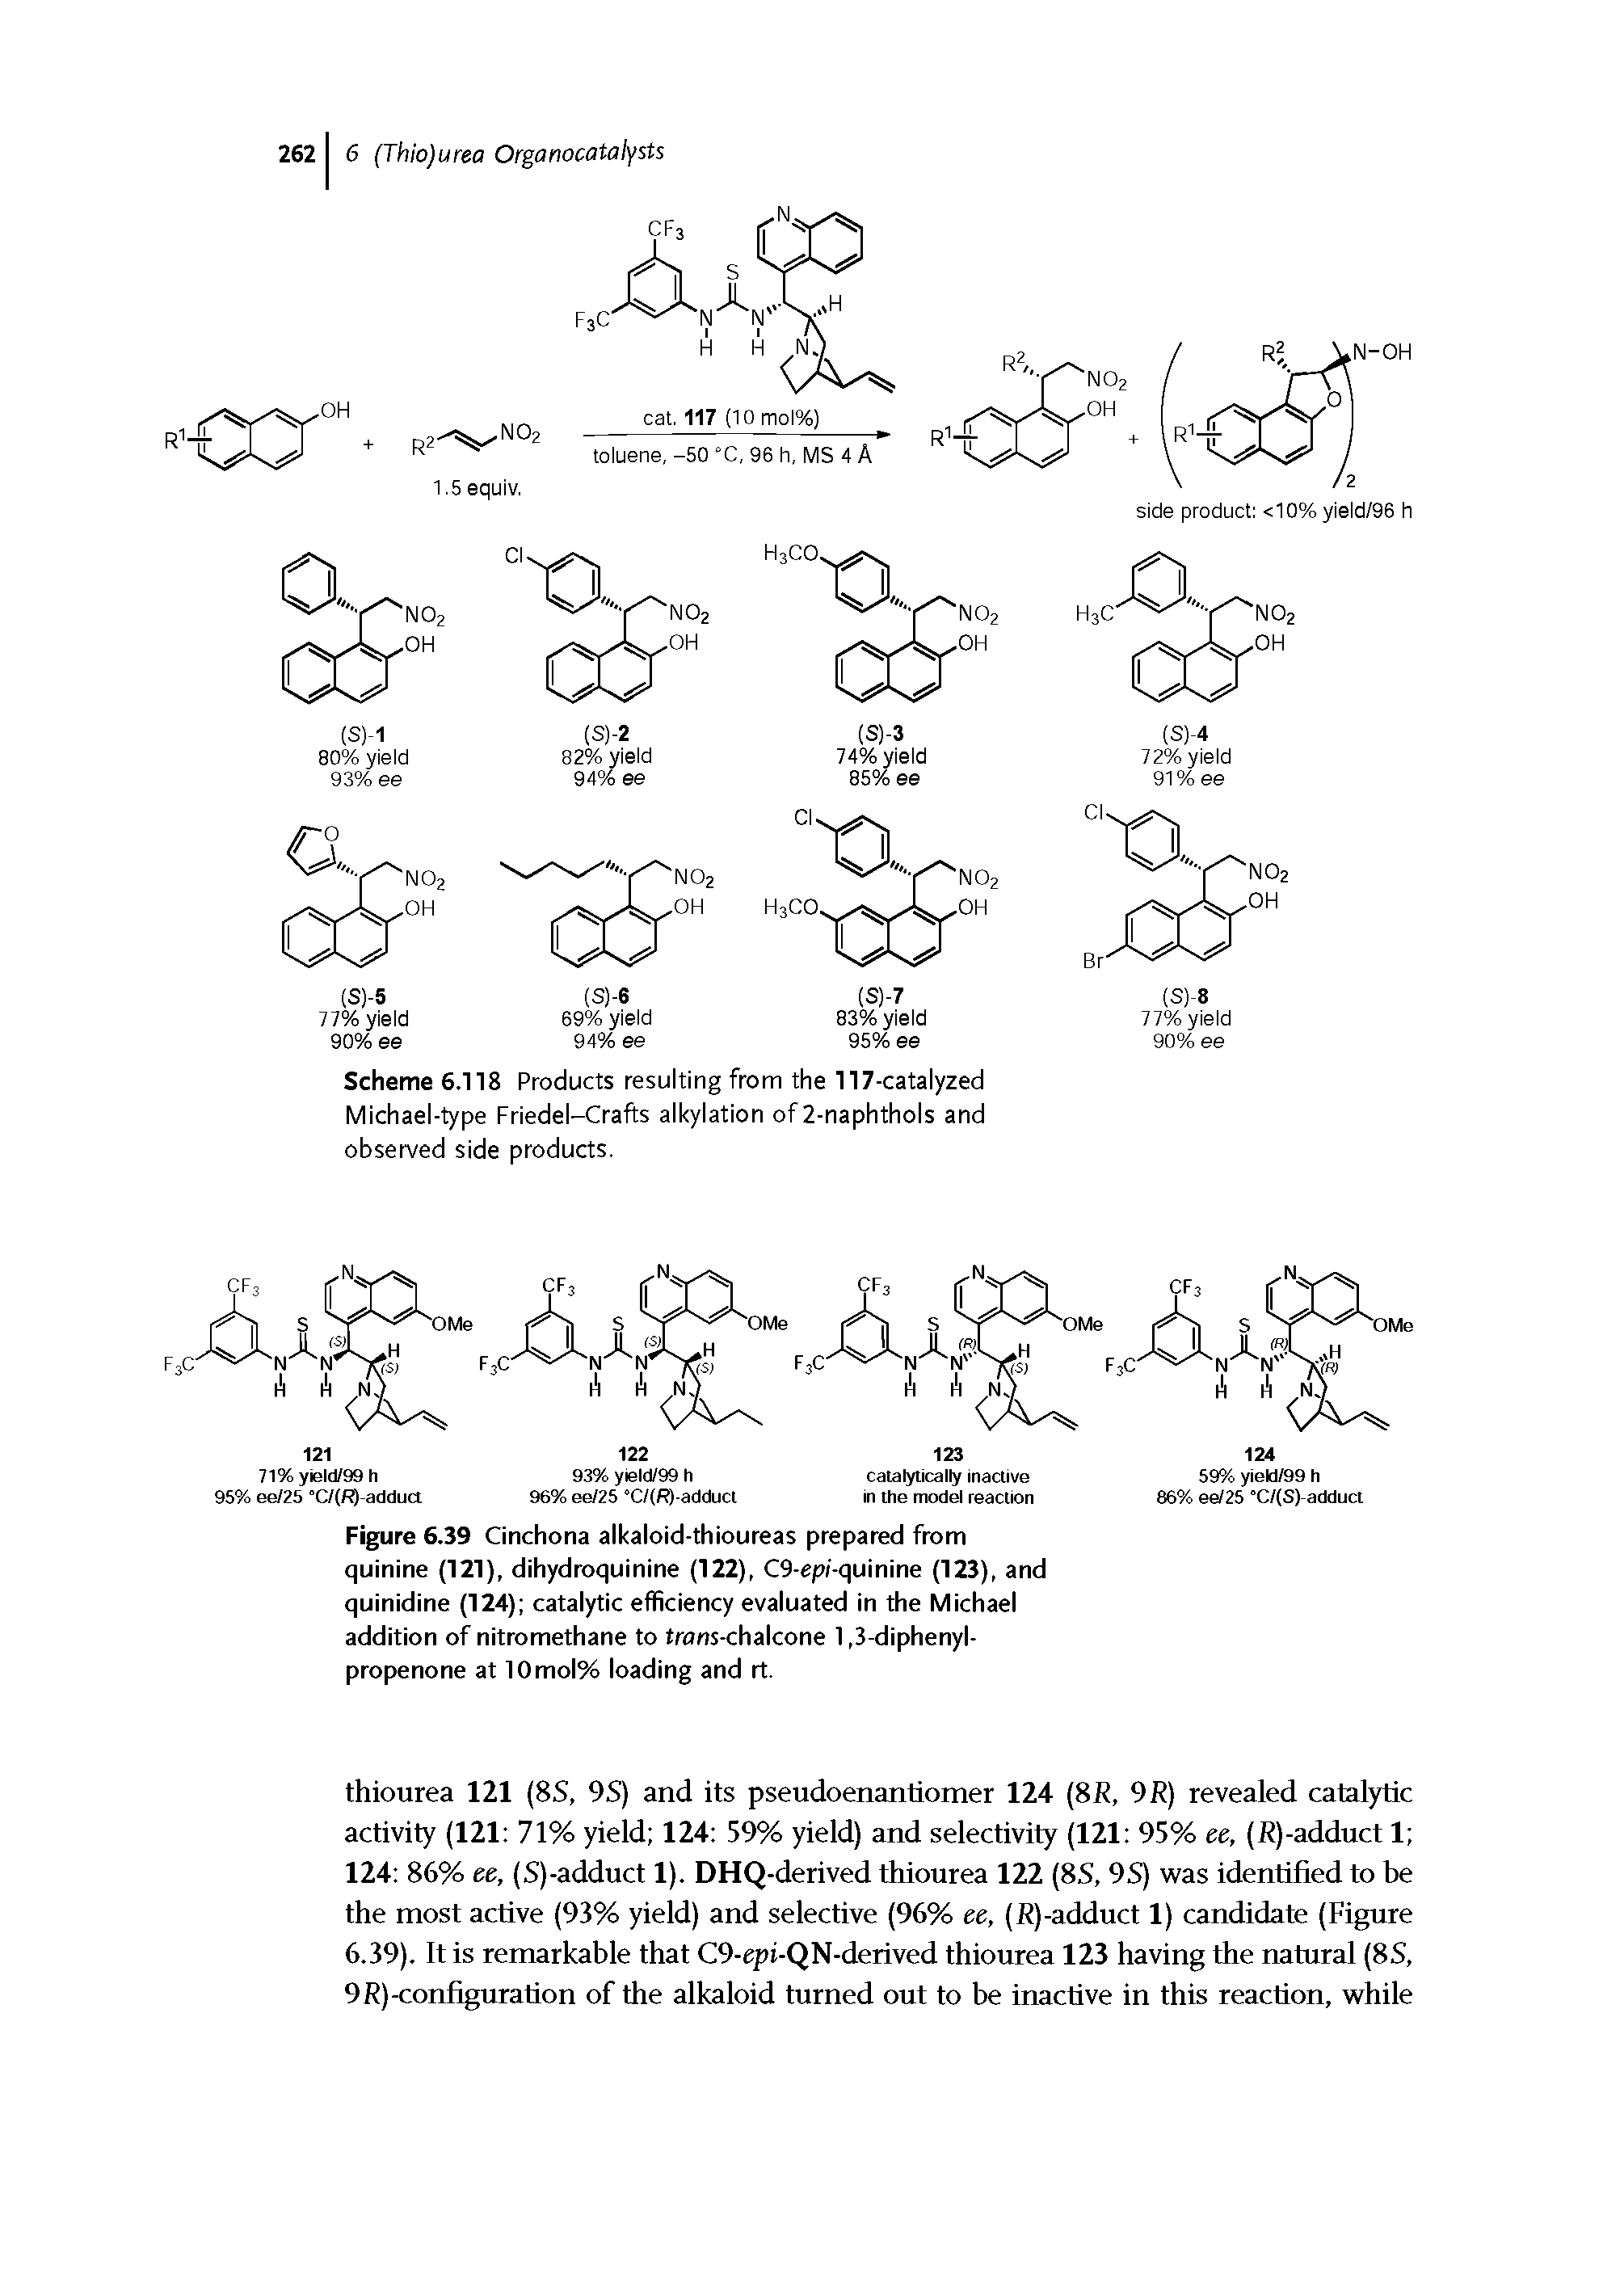 Figure 6.39 Cinchona alkaloid-thioureas prepared from quinine (121), dihydroquinine (122), C9-epi-quinine (123), and quinidine (124) catalytic efficiency evaluated in the Michael addition of nitromethane to tram-chalcone 1,3-diphenyl-propenone at 10mol% loading and rt.